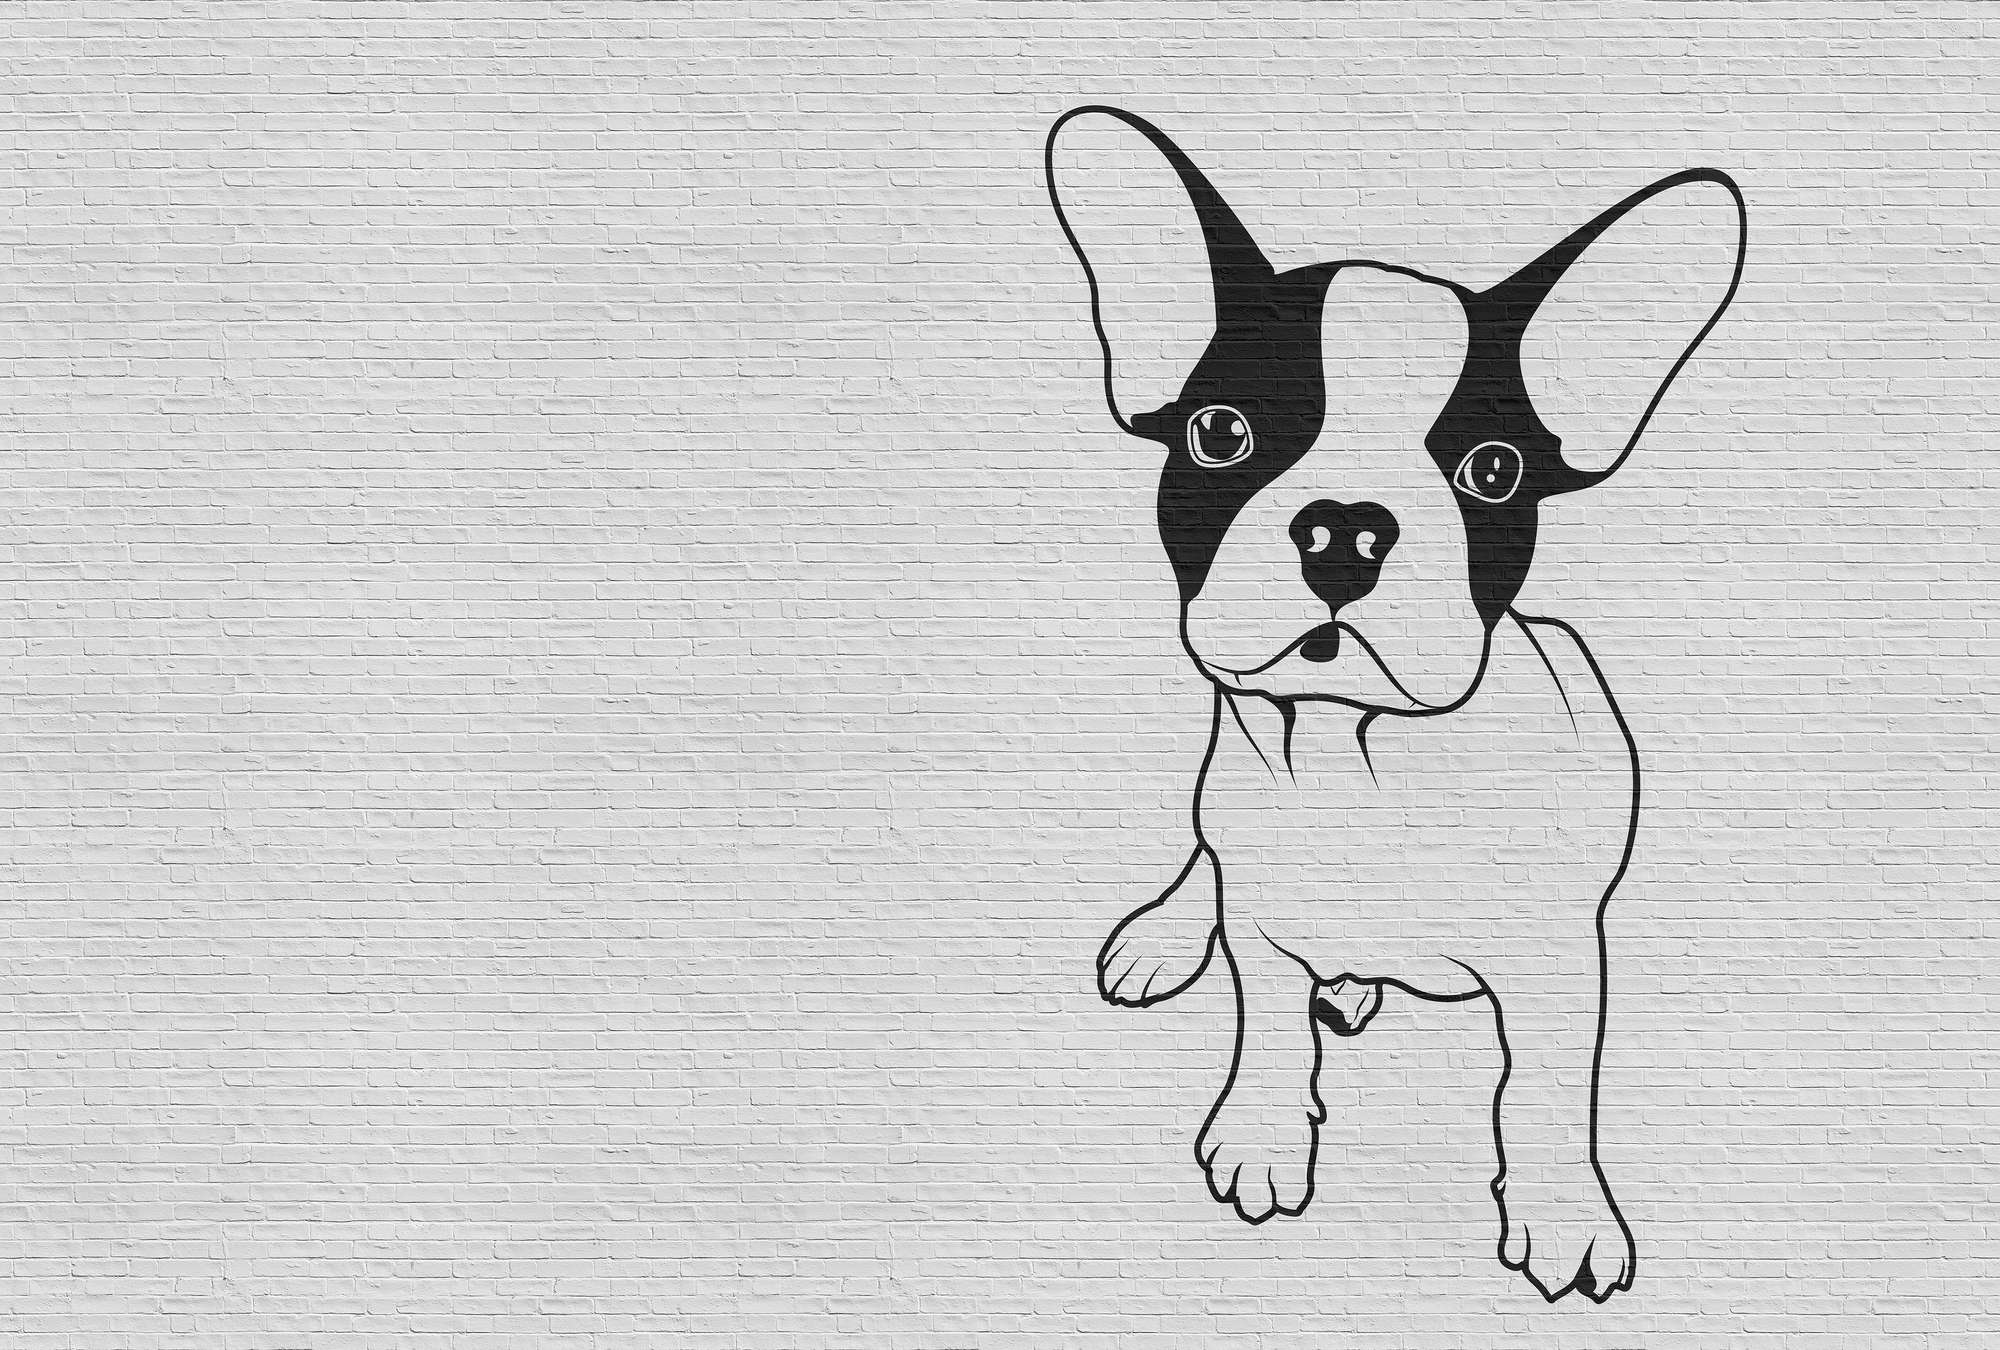             Tattoo you 2 - French Bulldog Wallpaper, Black and White - Grey, Black | Pearl Smooth Non-woven
        